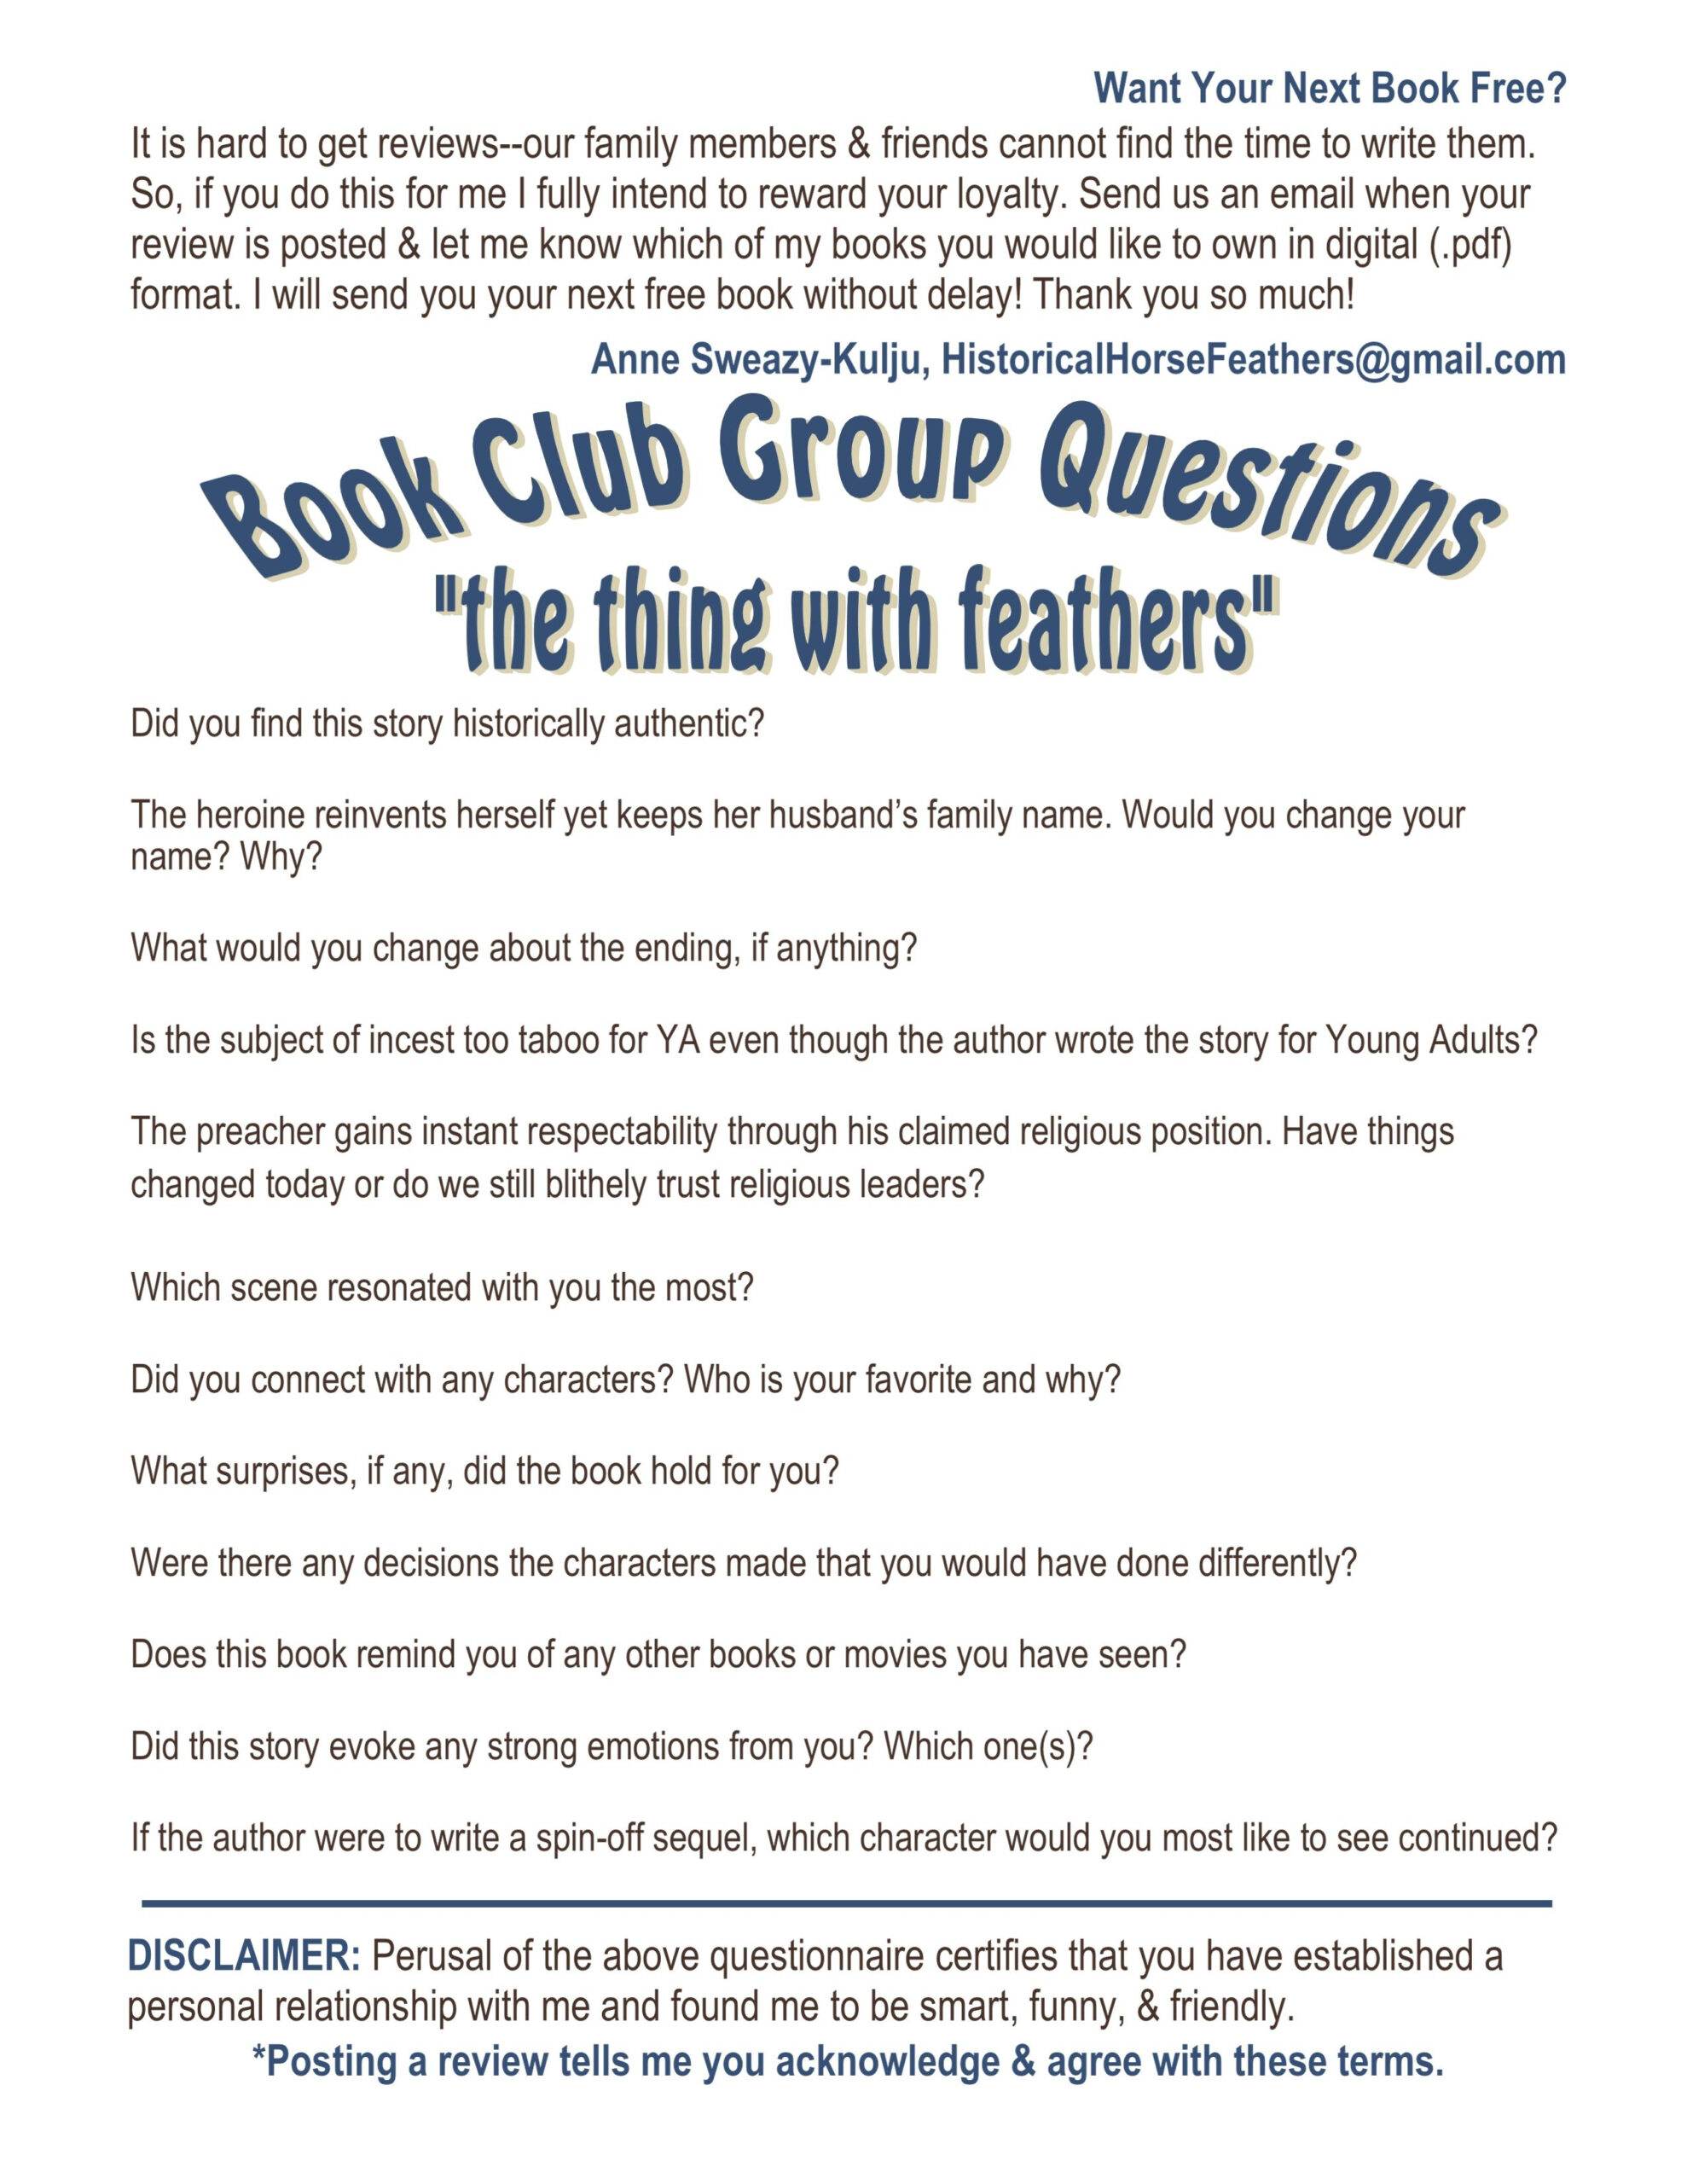 Do You Have A Book Club Download And Print These Questions For Your 